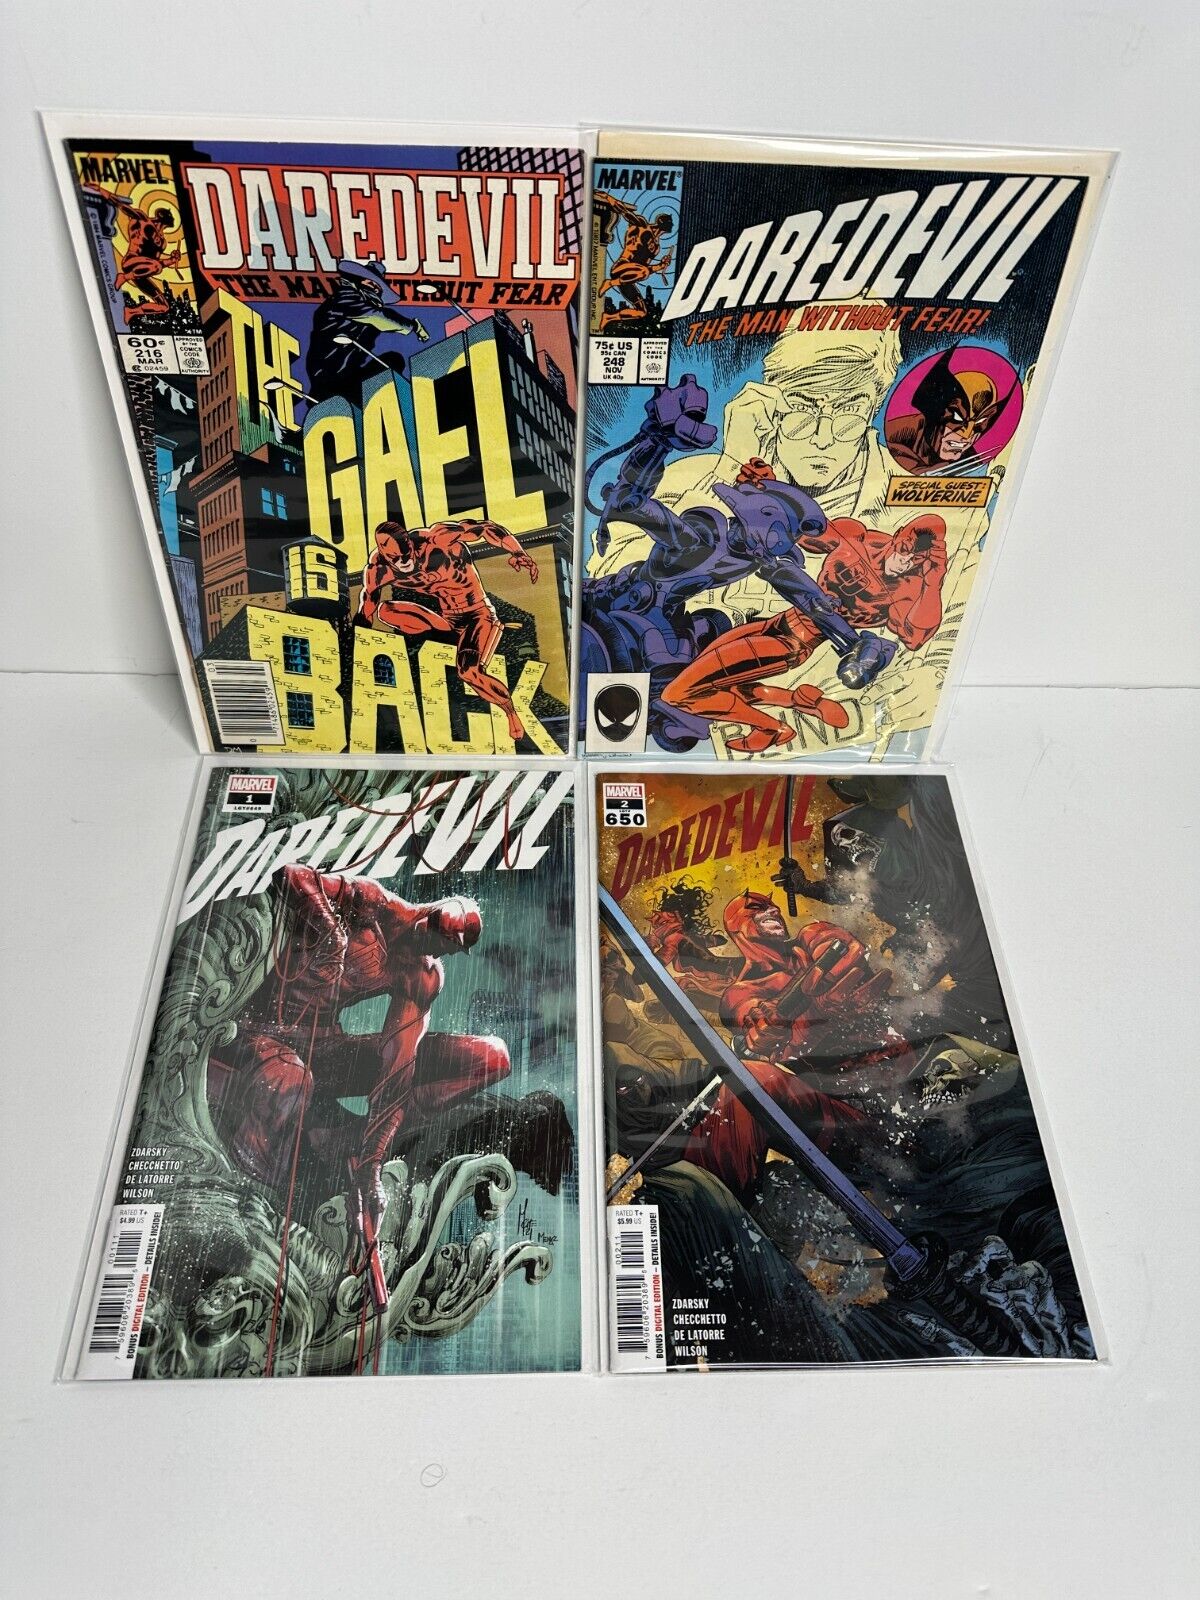 Daredevil #1 and 2 (649/650) (Marvel Comics September 2022) and 2 Classic Titles